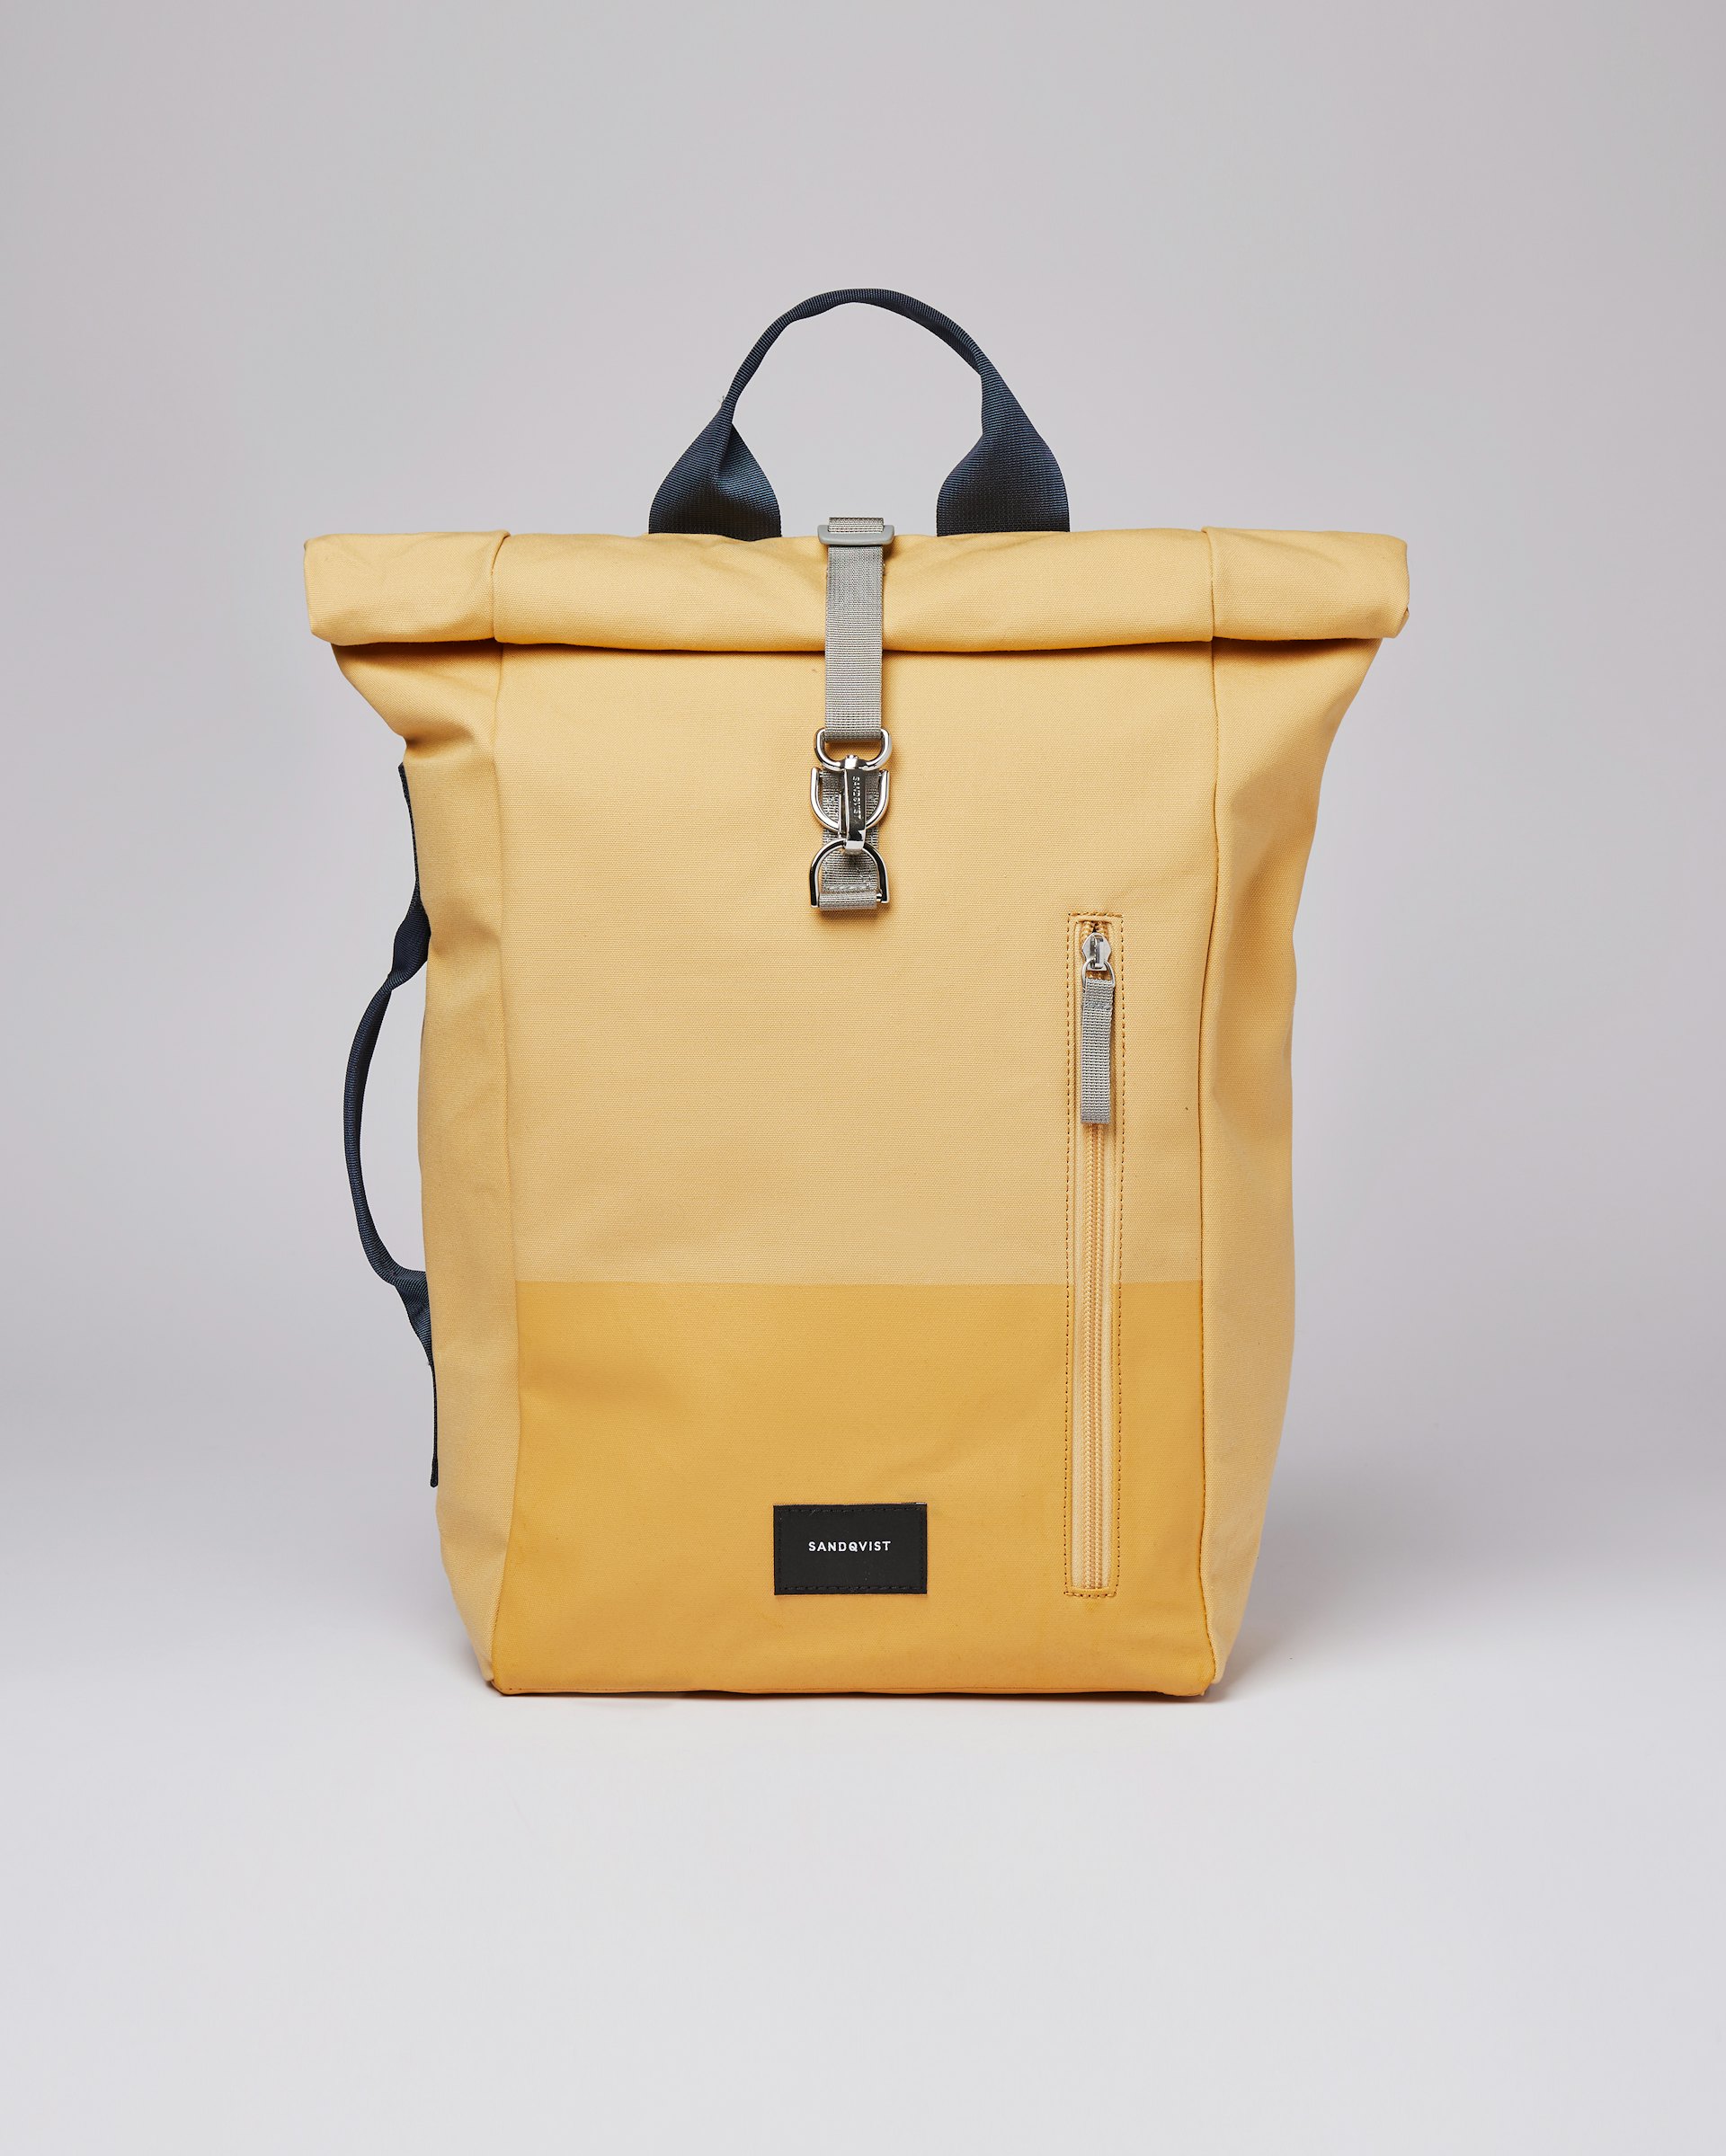 Dante vegan belongs to the category Backpacks and is in color yellow leaf